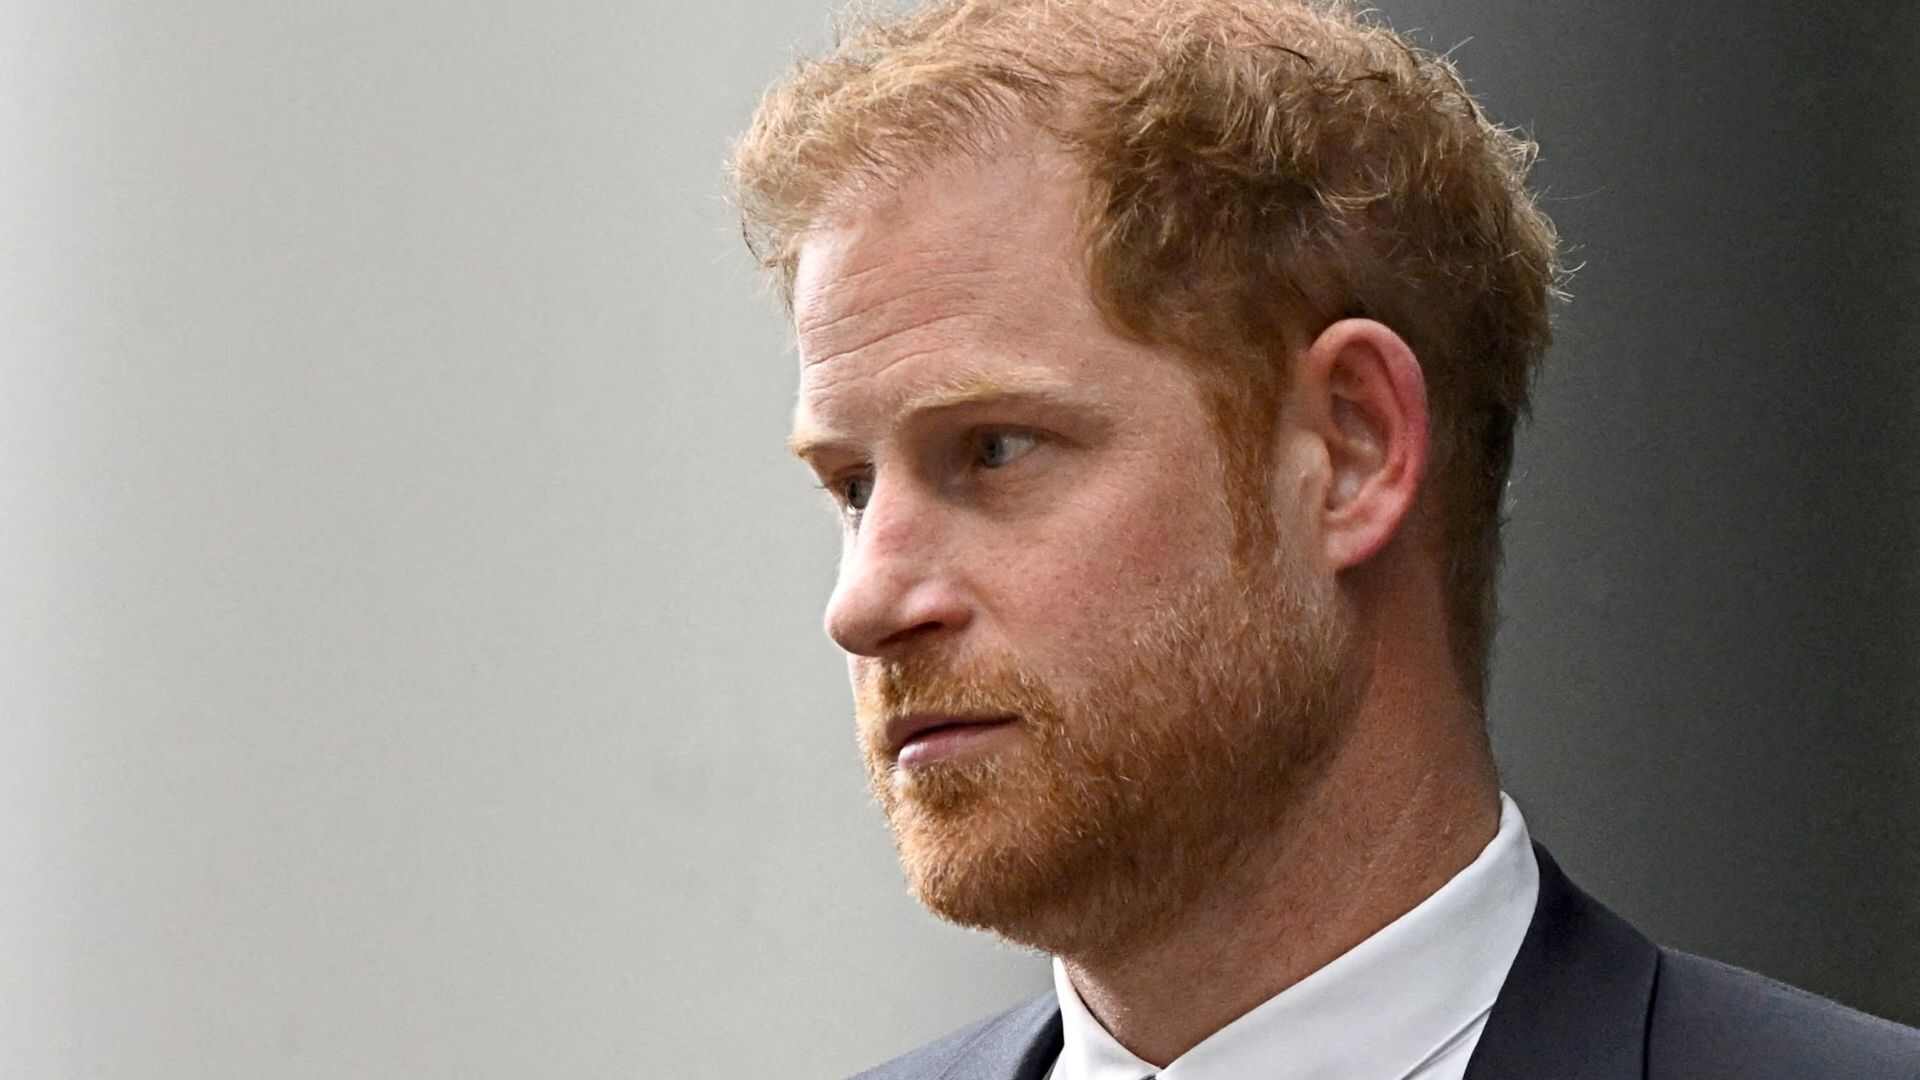 Prince Harry Faces ‘Betrayal’ Blow During UK Trip, Palace Announces William To Be Colonel-In-Chief